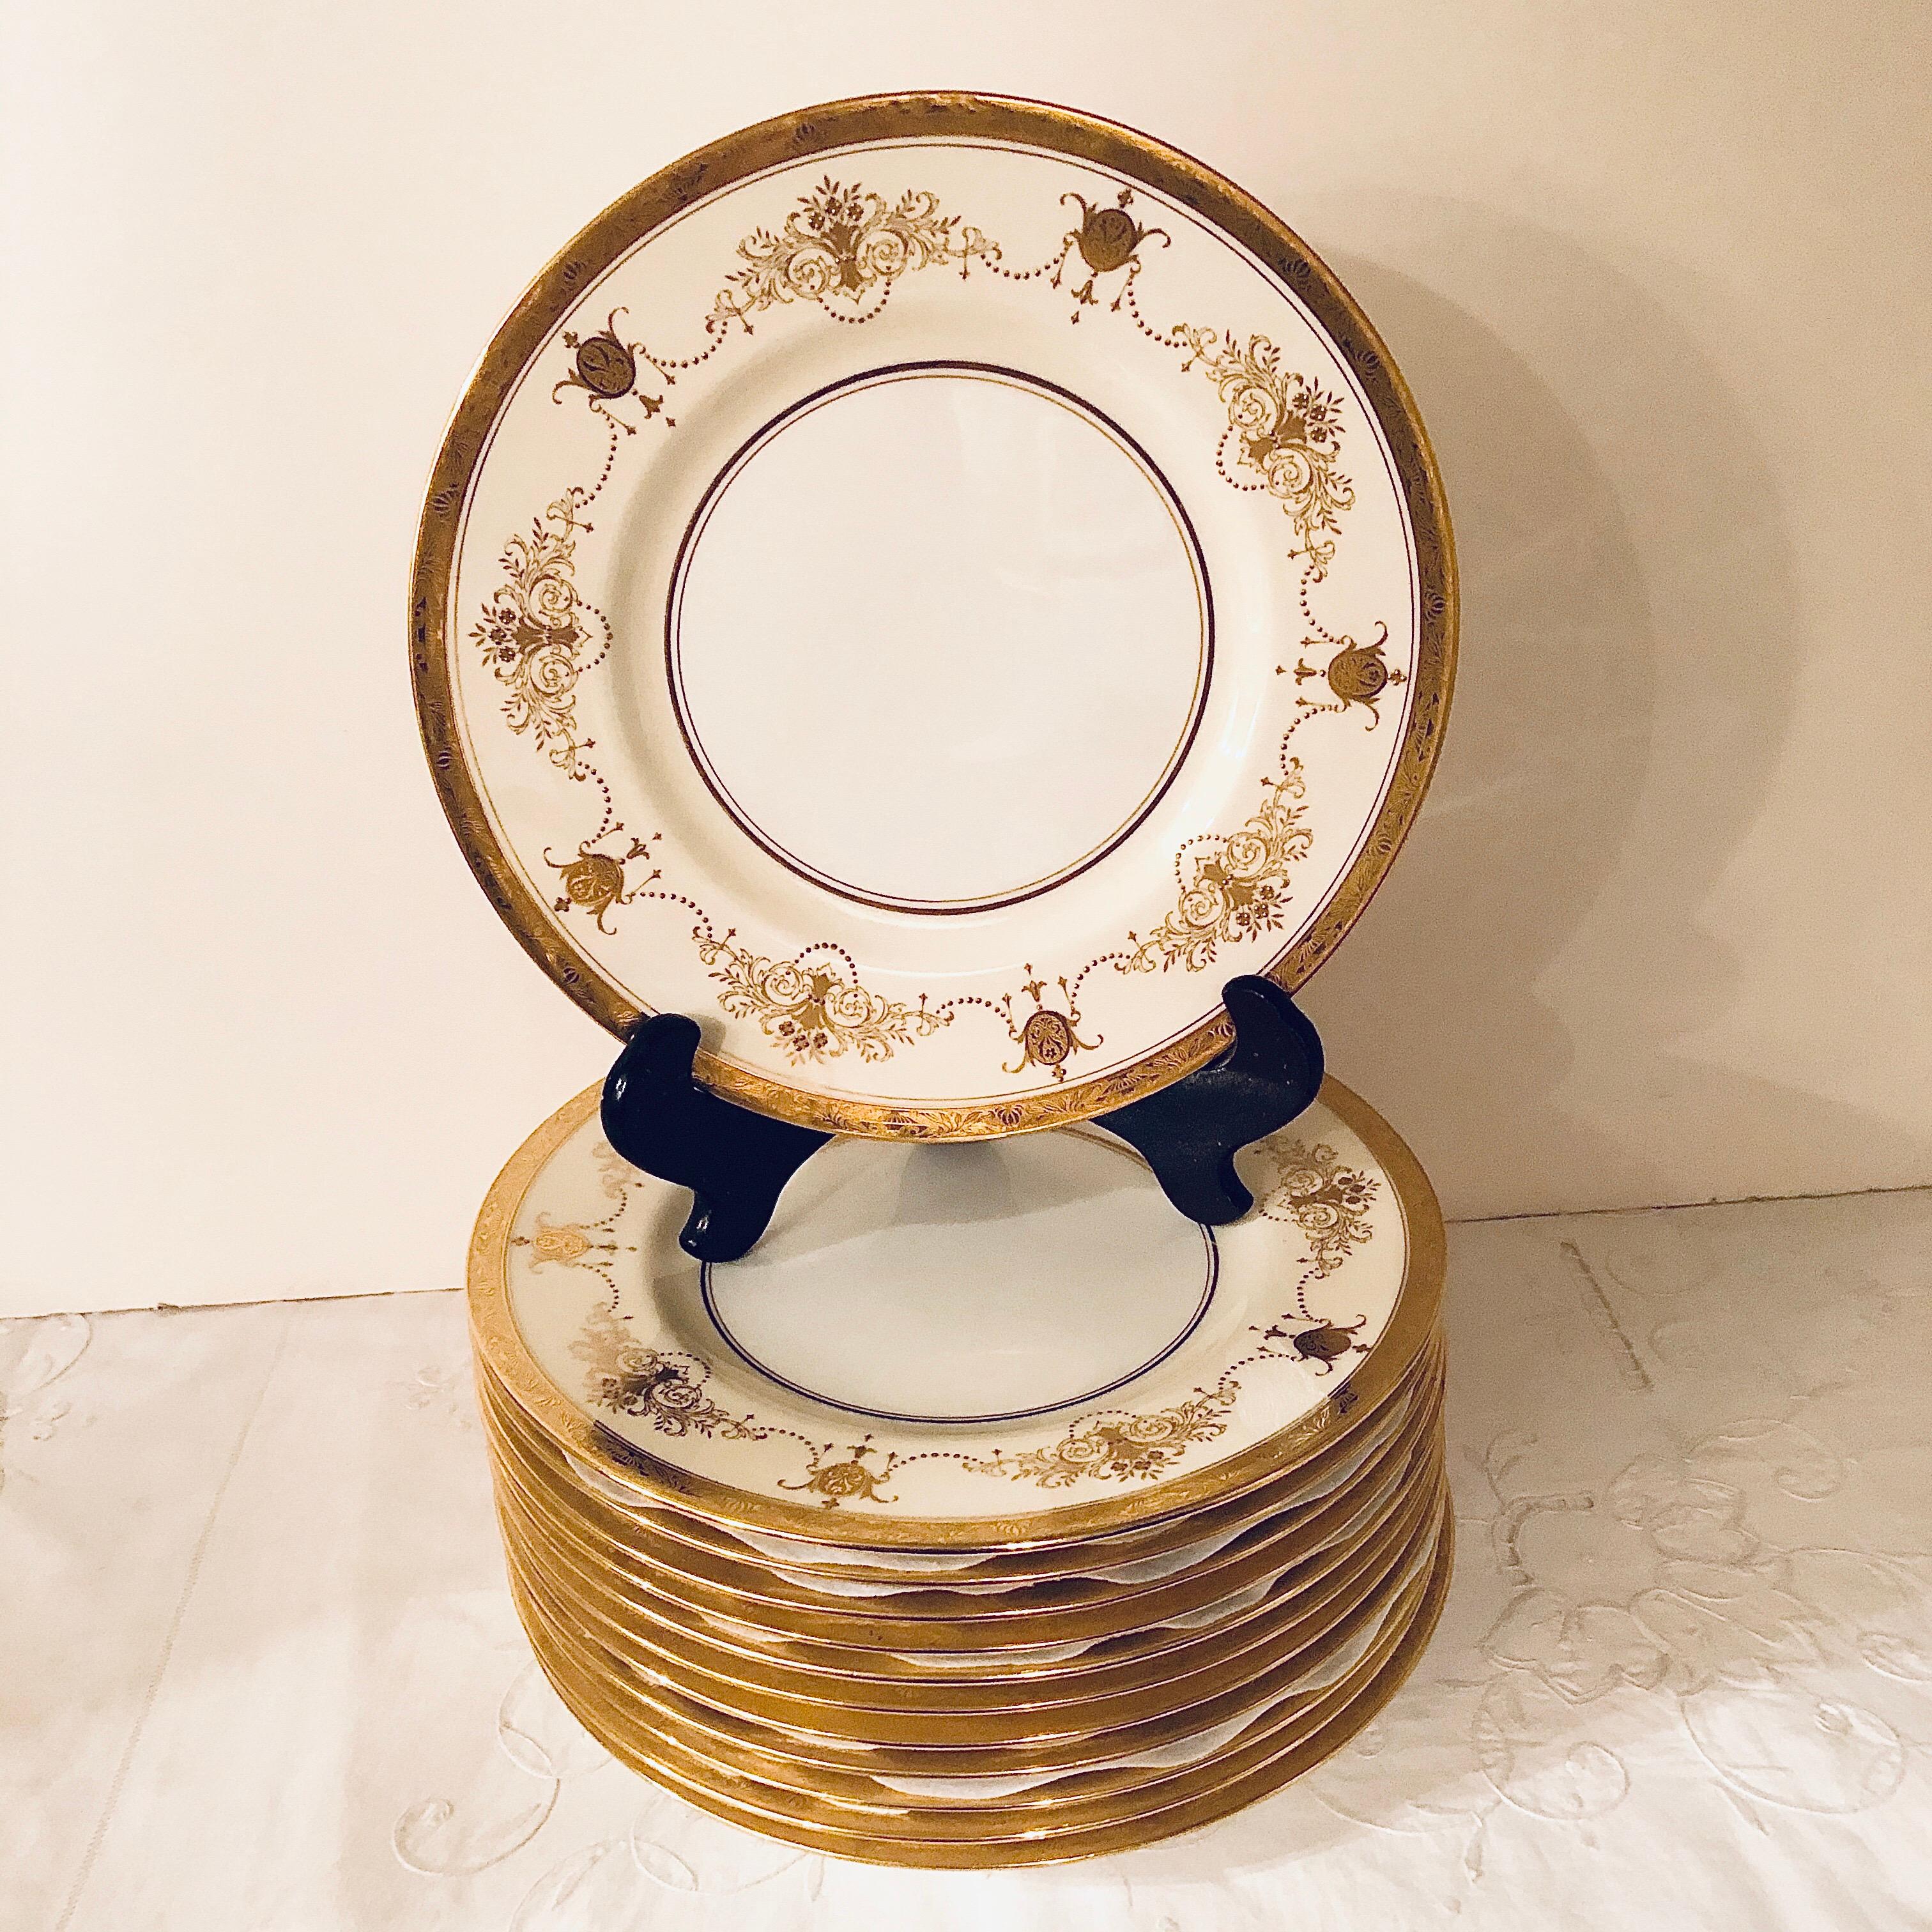 Set of 12 Minton Dinner Plates Decorated with Ribbons of Raised Gilded Jeweling For Sale 1